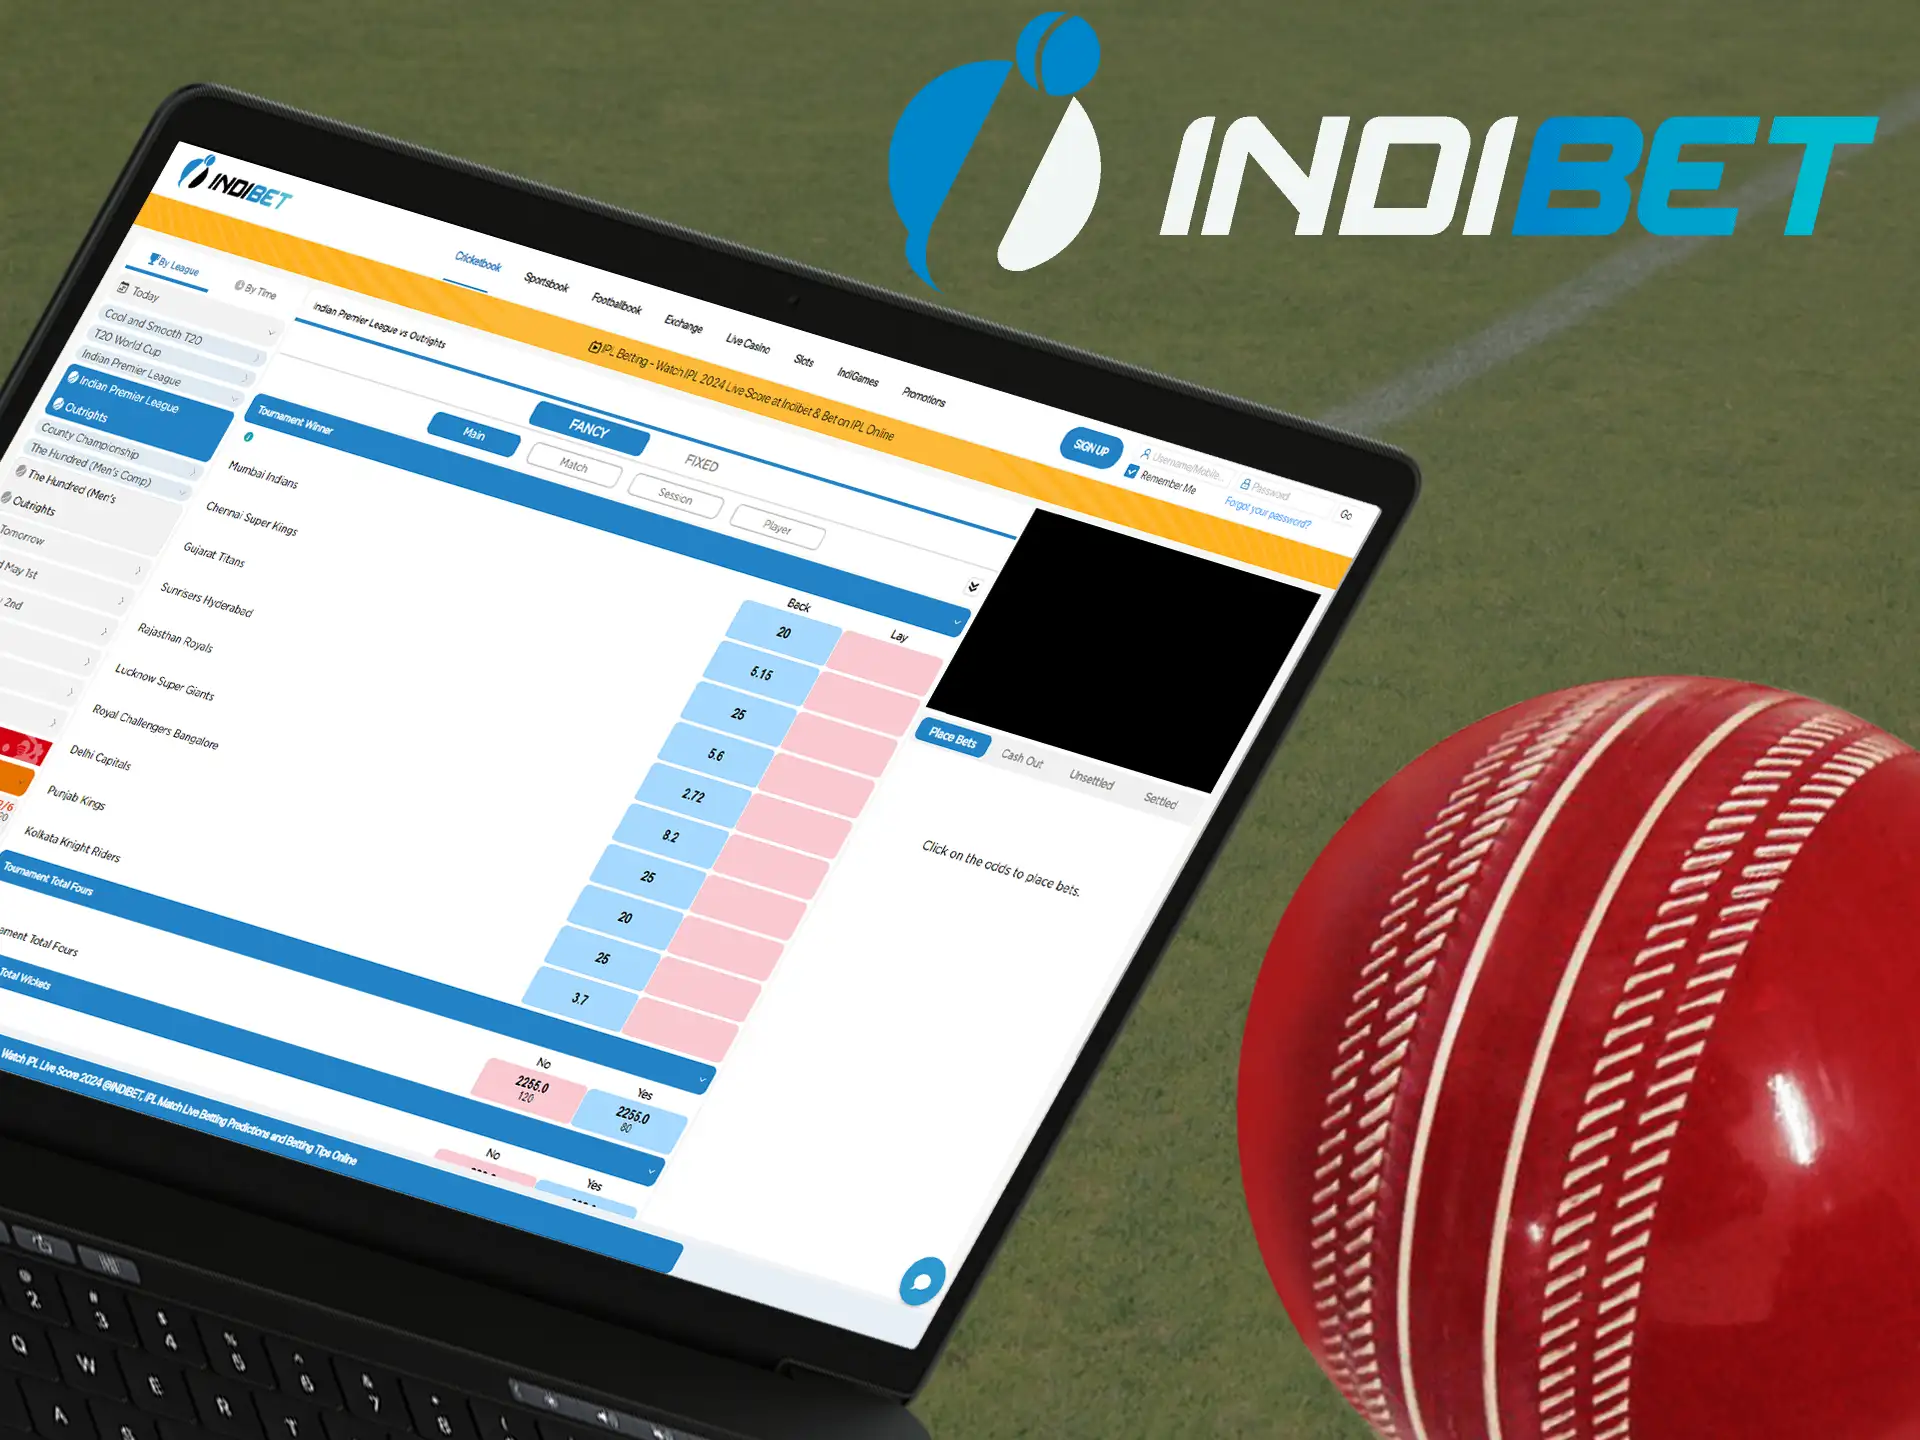 Follow your favorite cricket teams and place bets on Indibet!